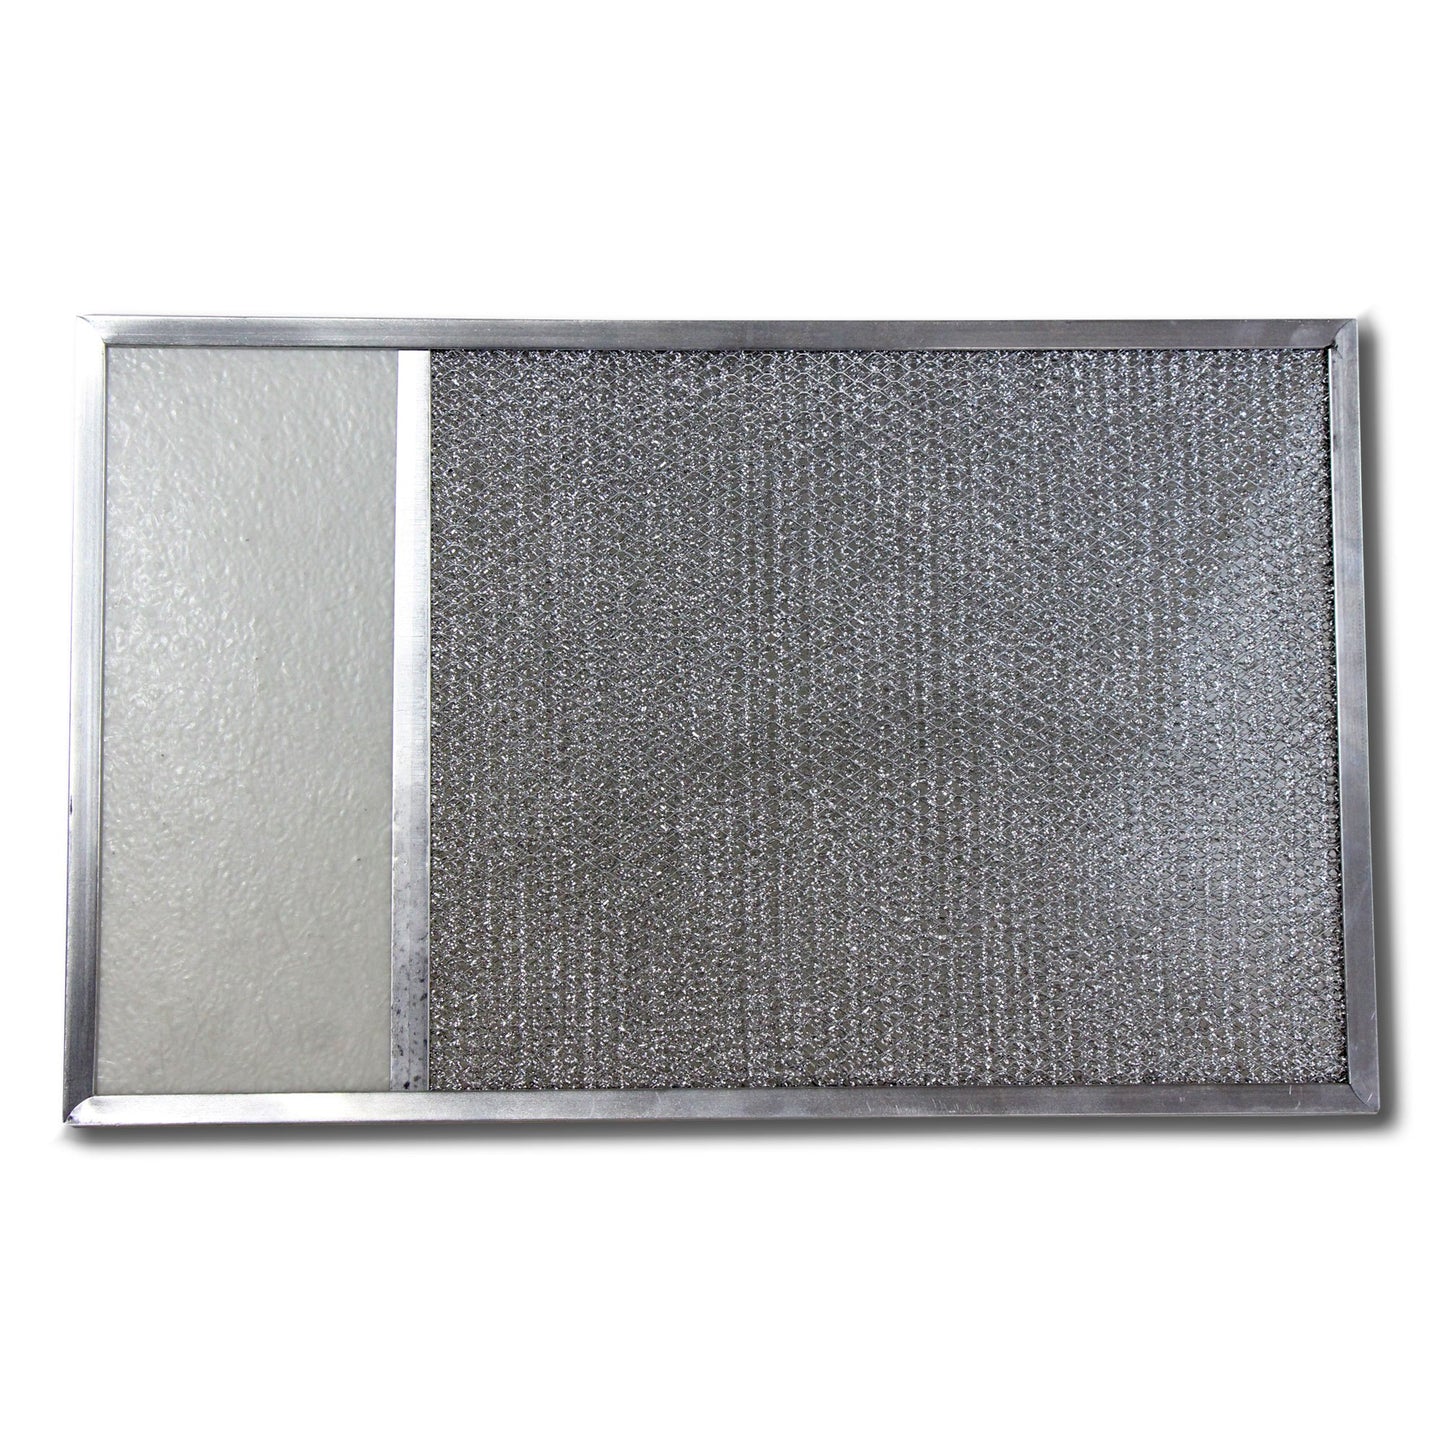 Reversomatic Replacement Grease Filter For Range Hood 4000-200 (PN011822)